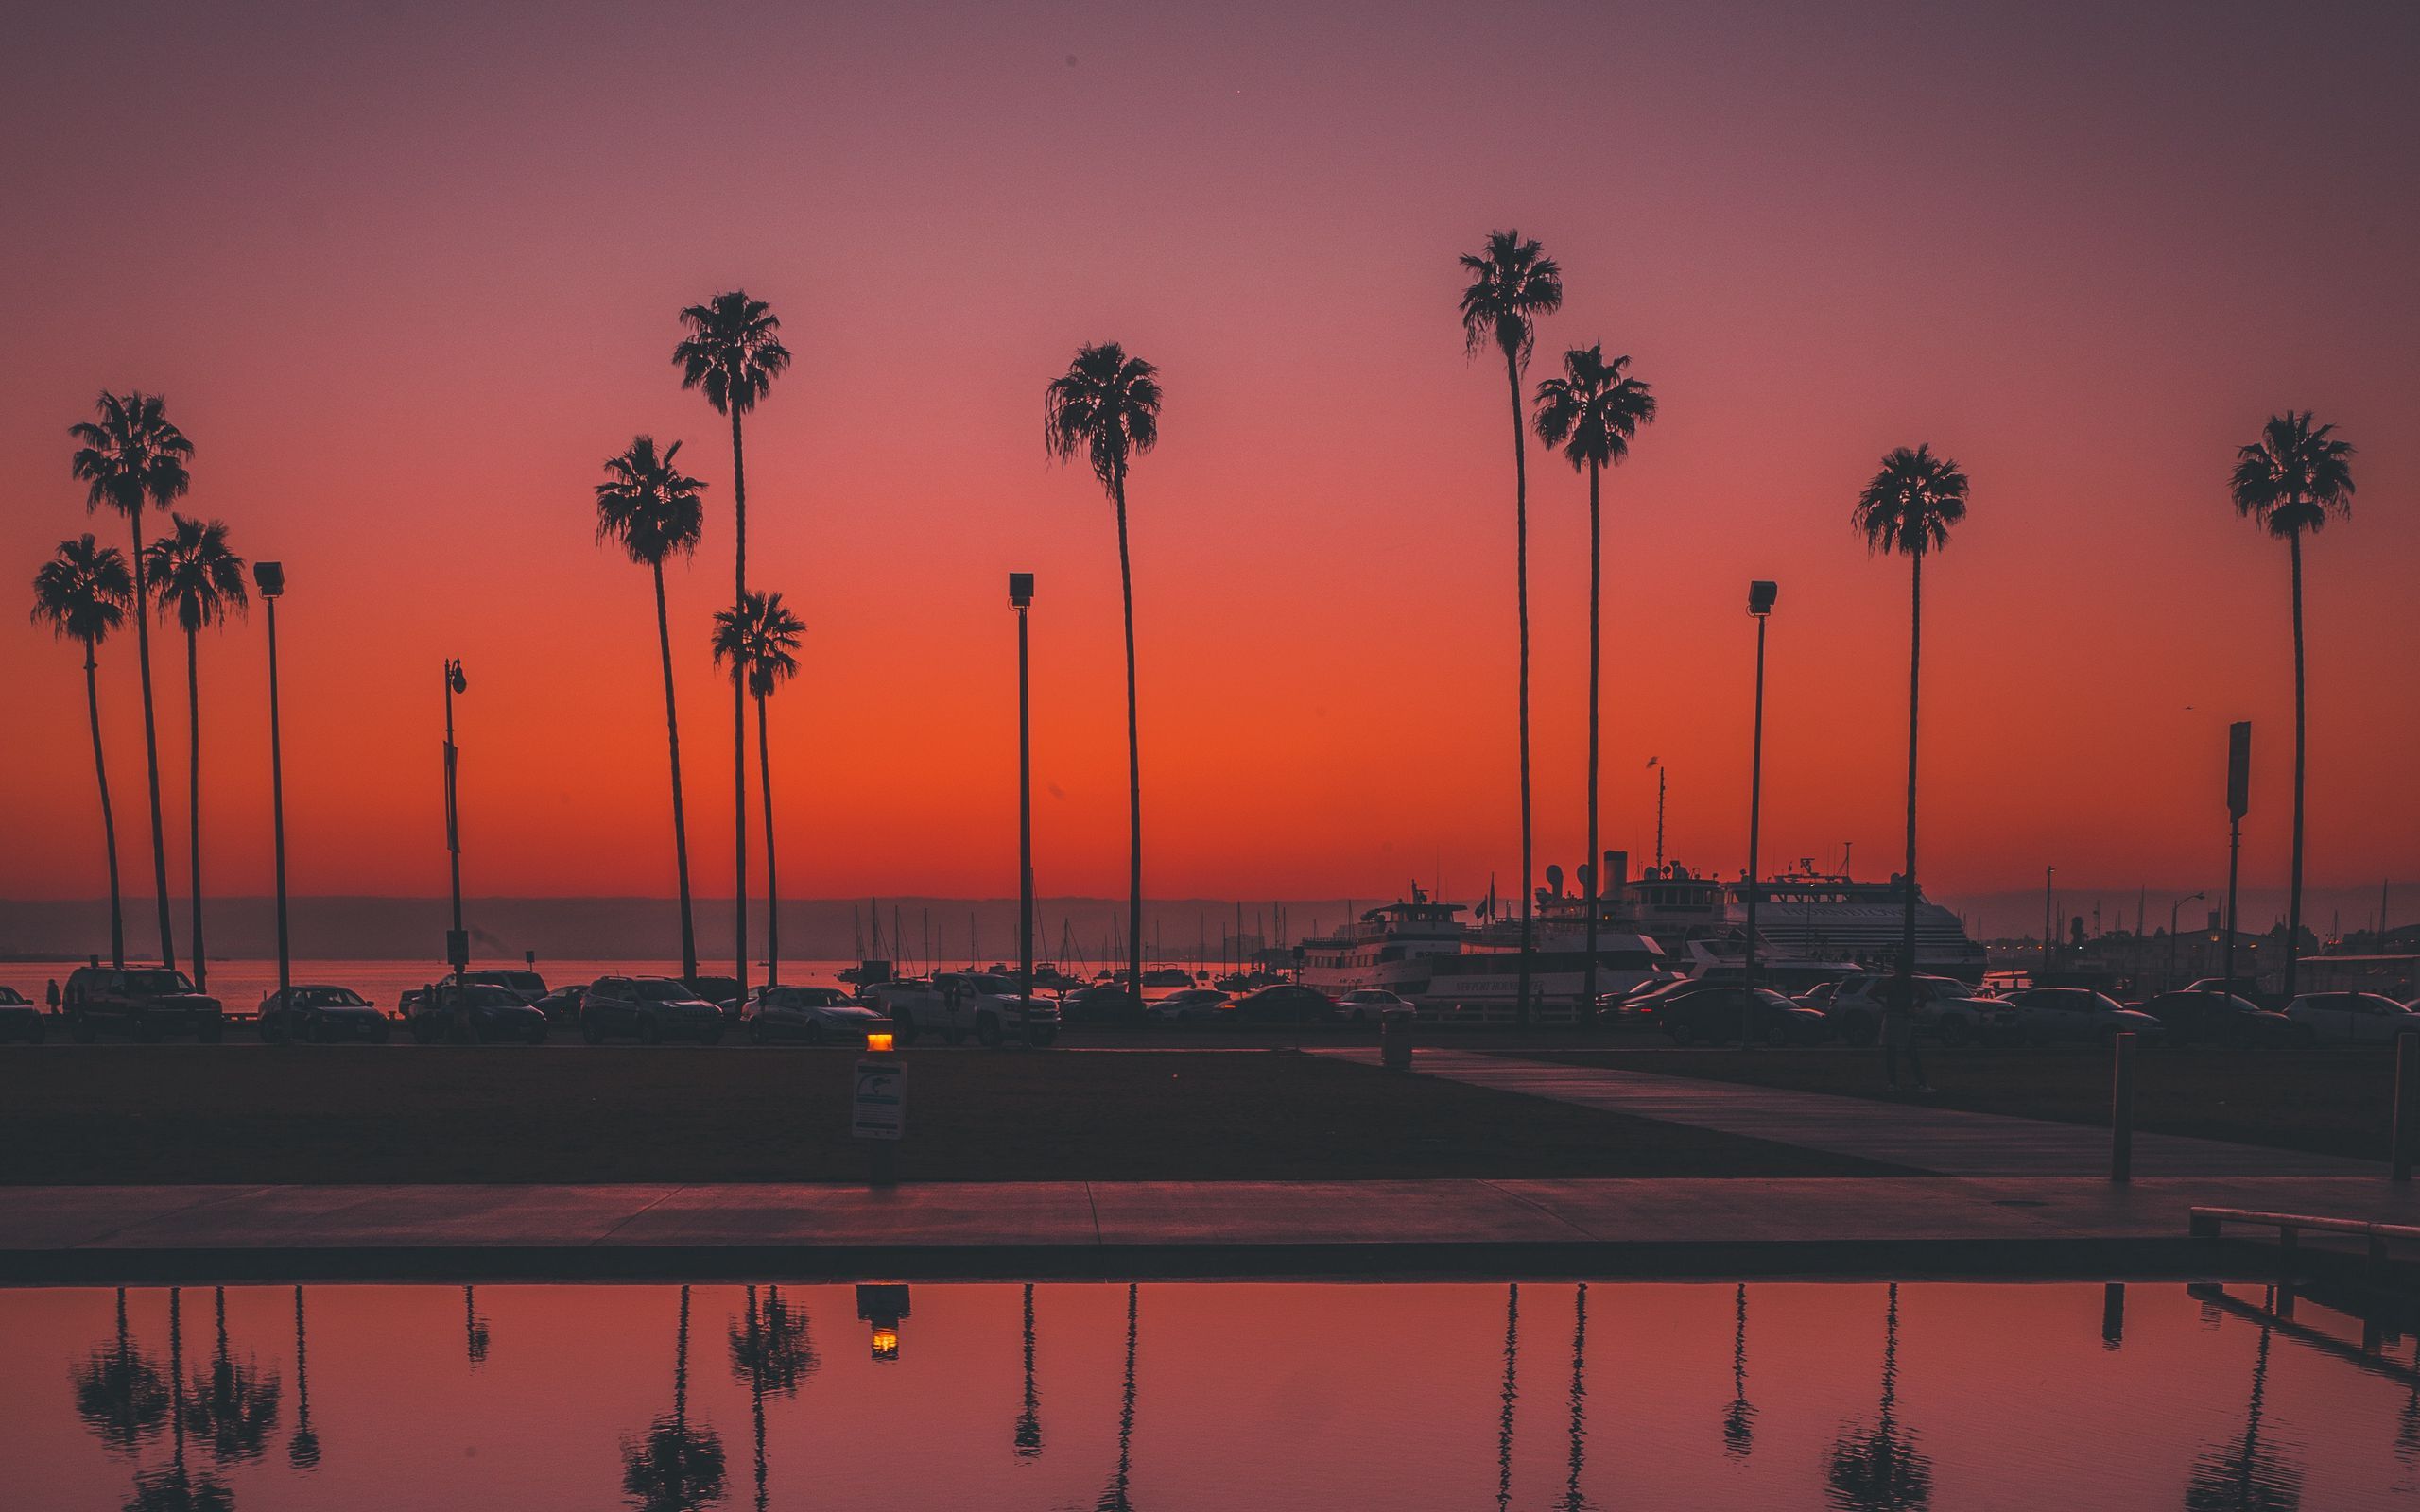 Download wallpaper 2560x1600 palms, sunset, san diego, usa, reflection widescreen 16:10 HD background